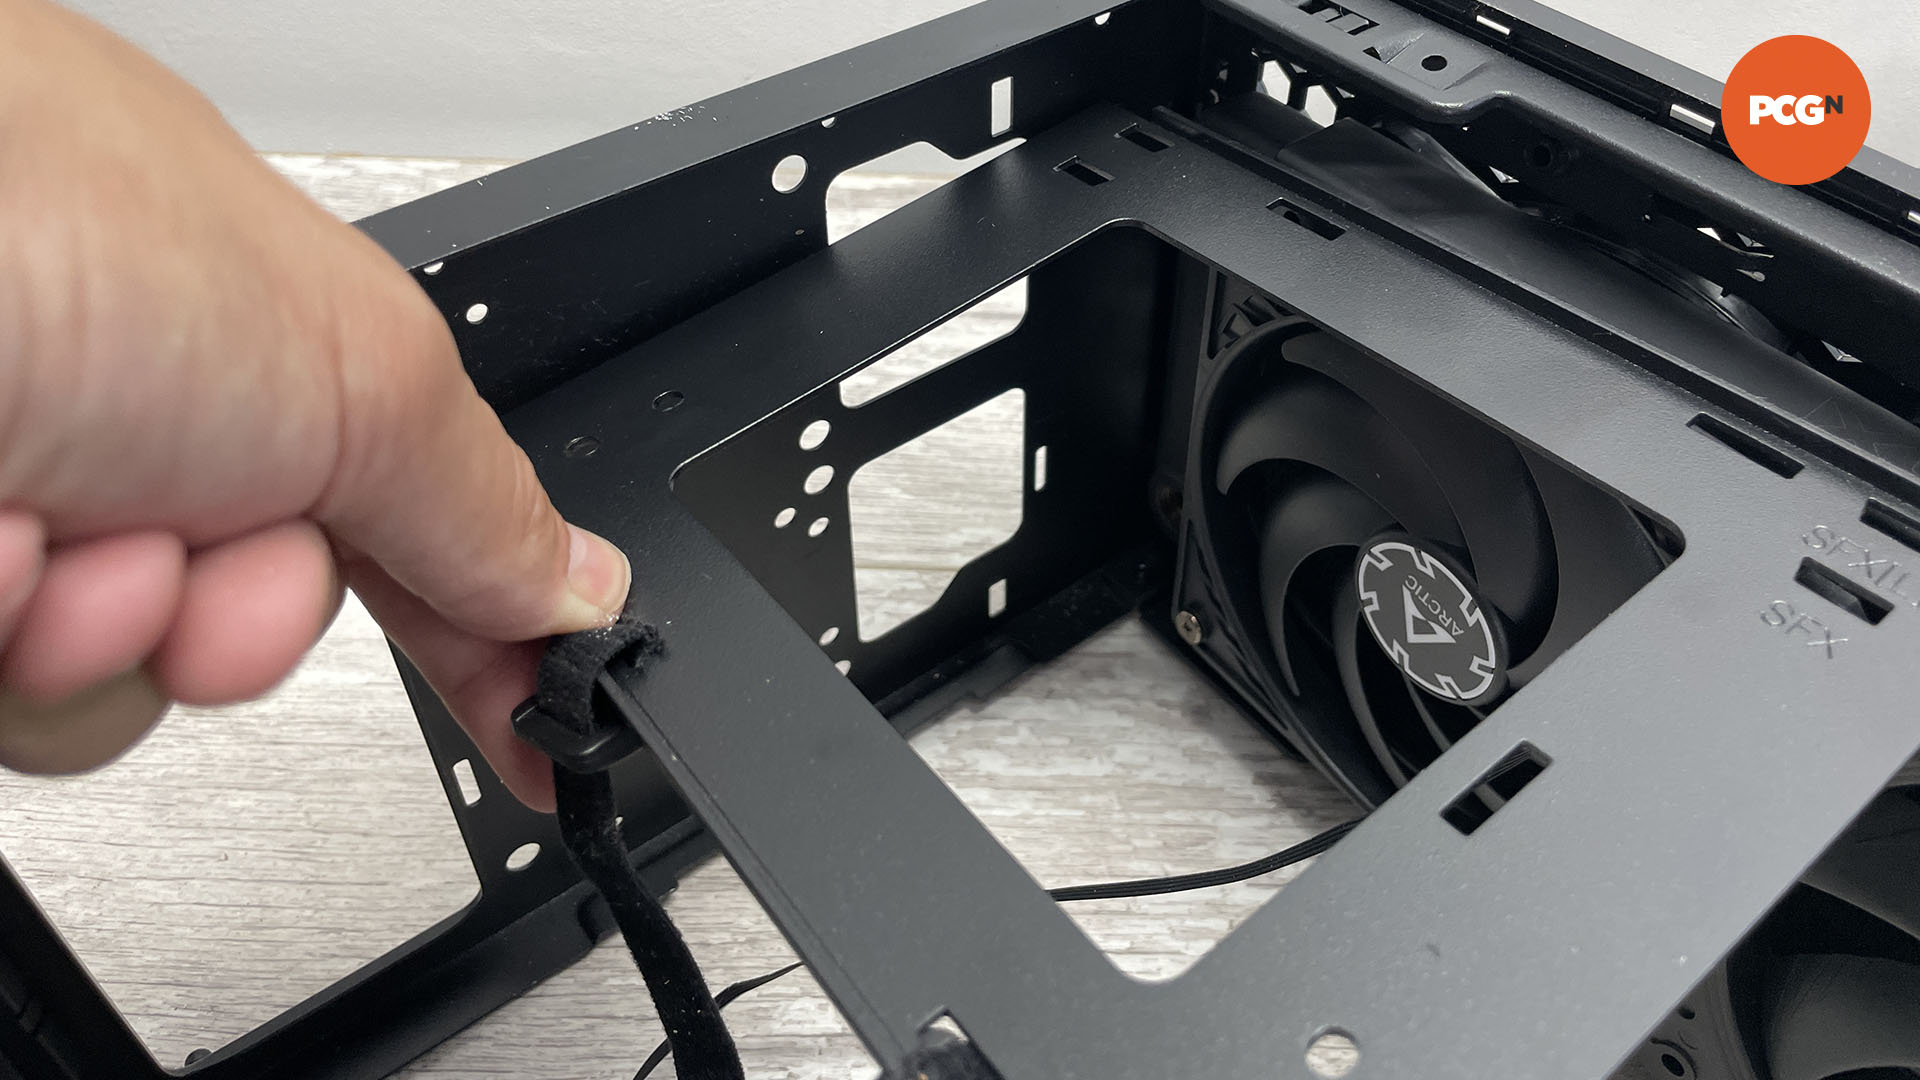 How to move the motherboard tray in your PC case: Check components are loose